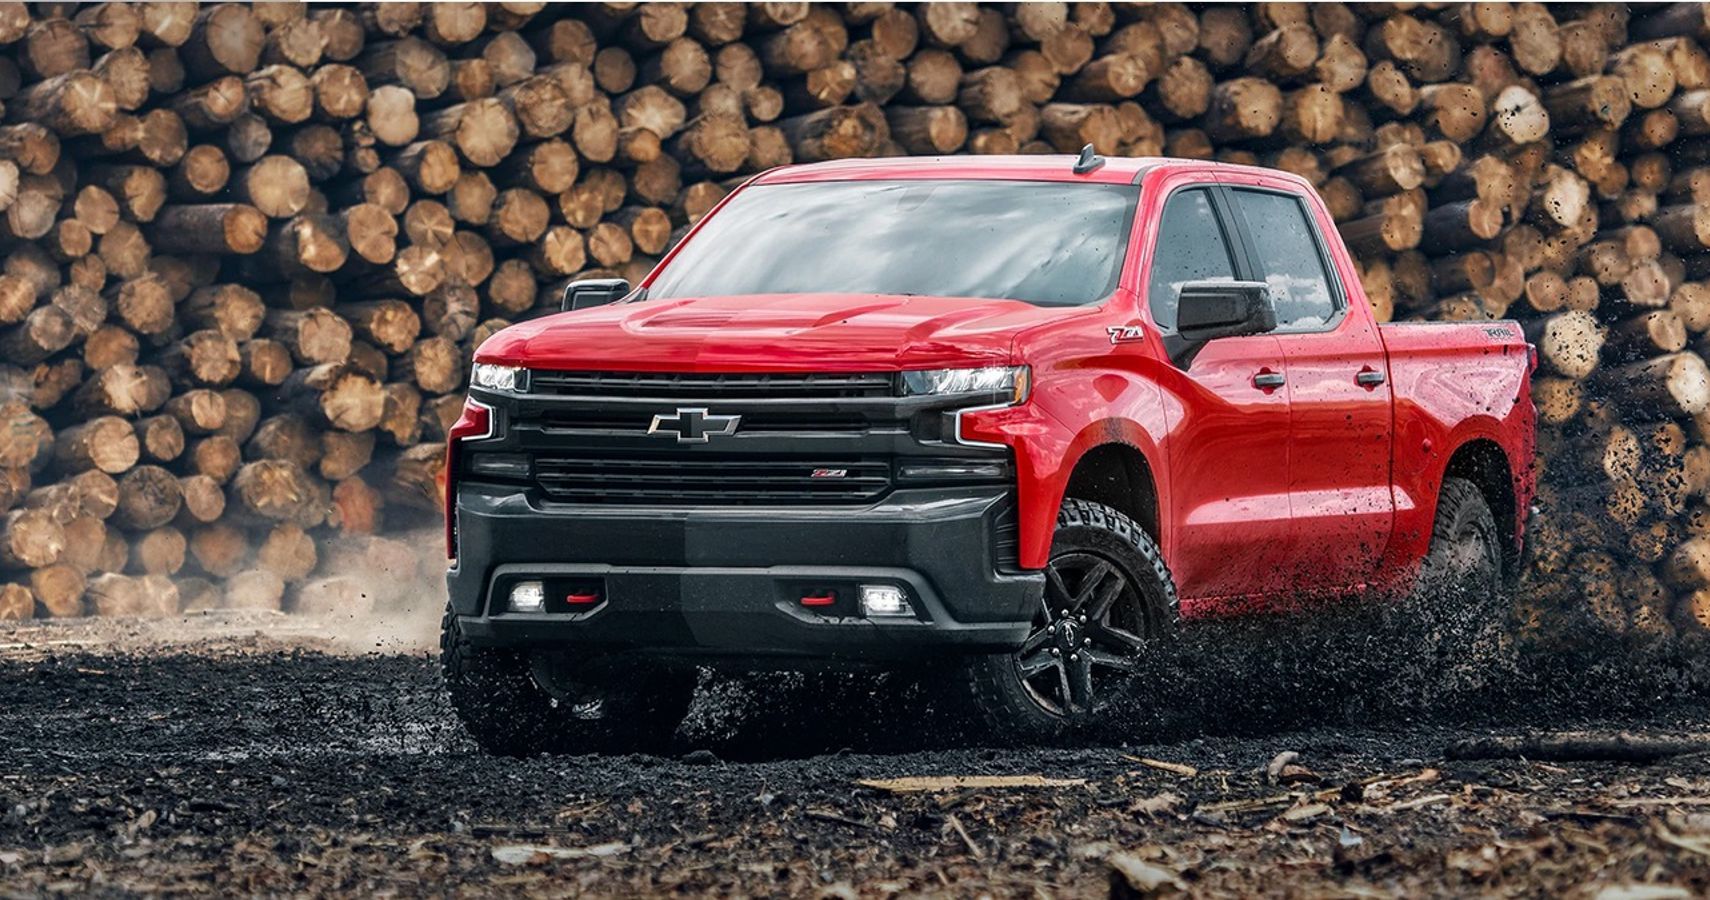 2021 Chevy Silverado Is Trail Boss The Right Trim For You